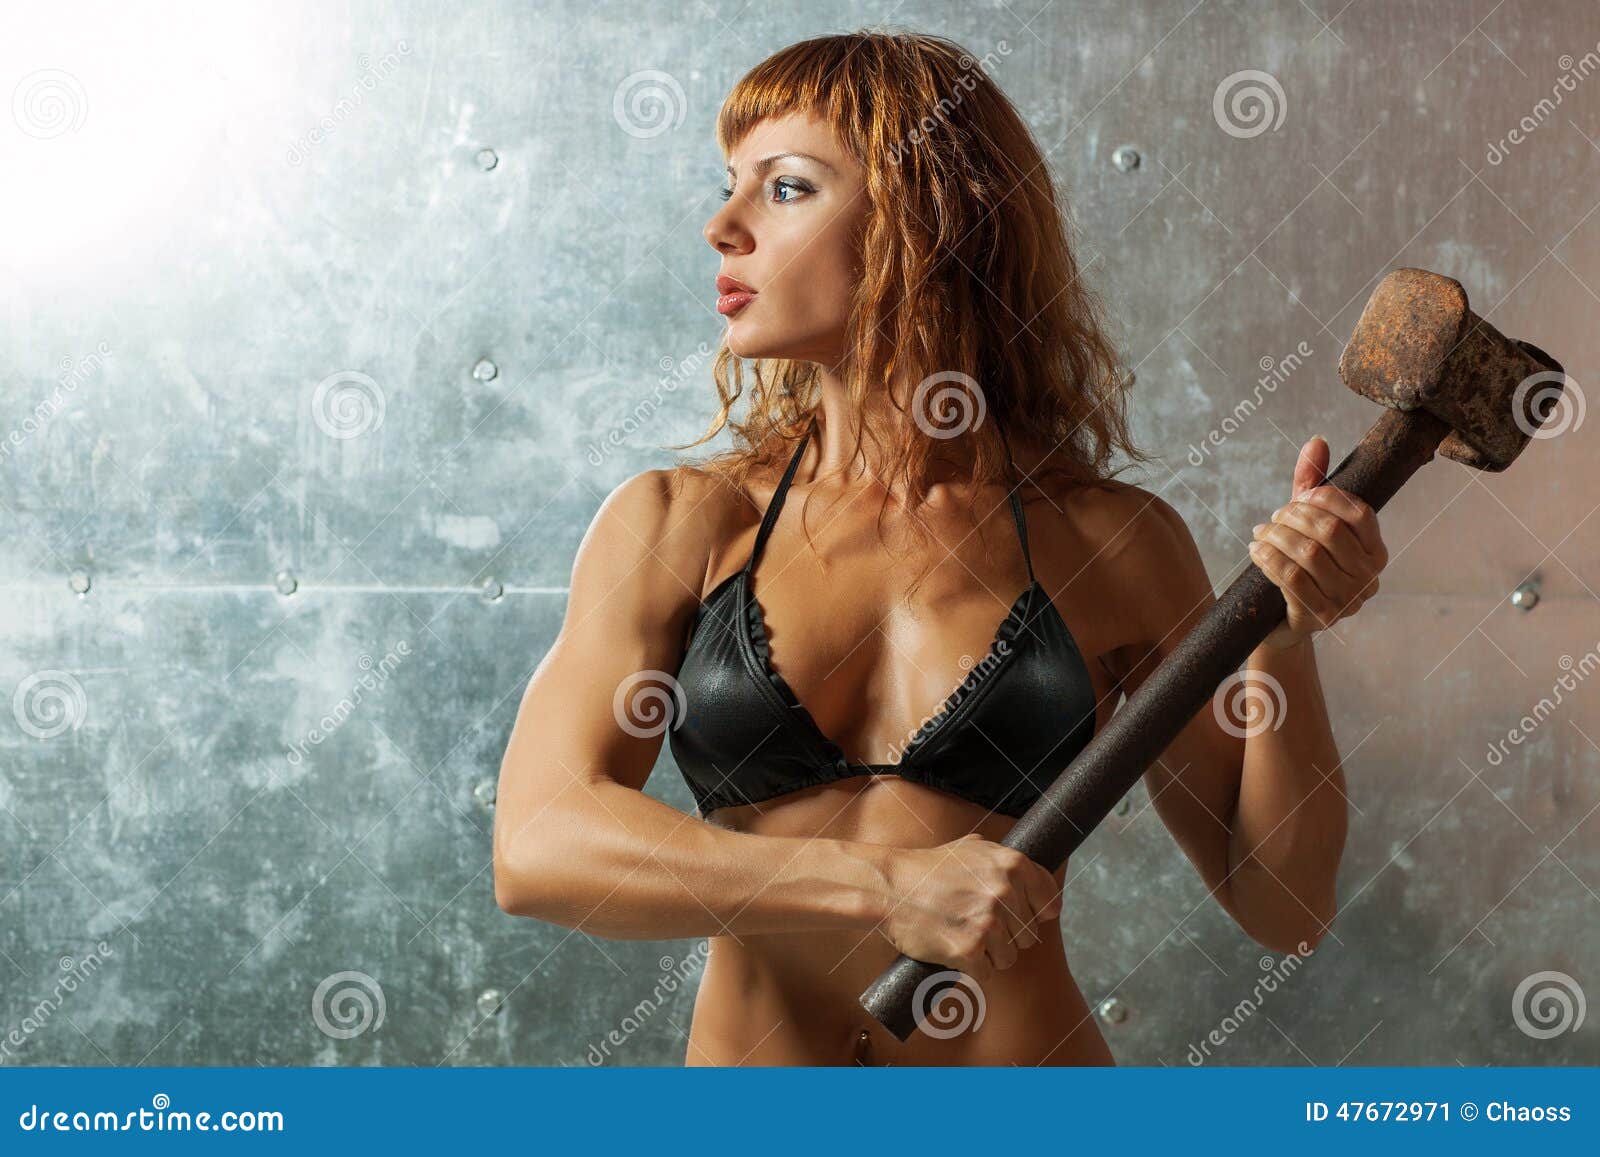 Strong Woman Porn 26